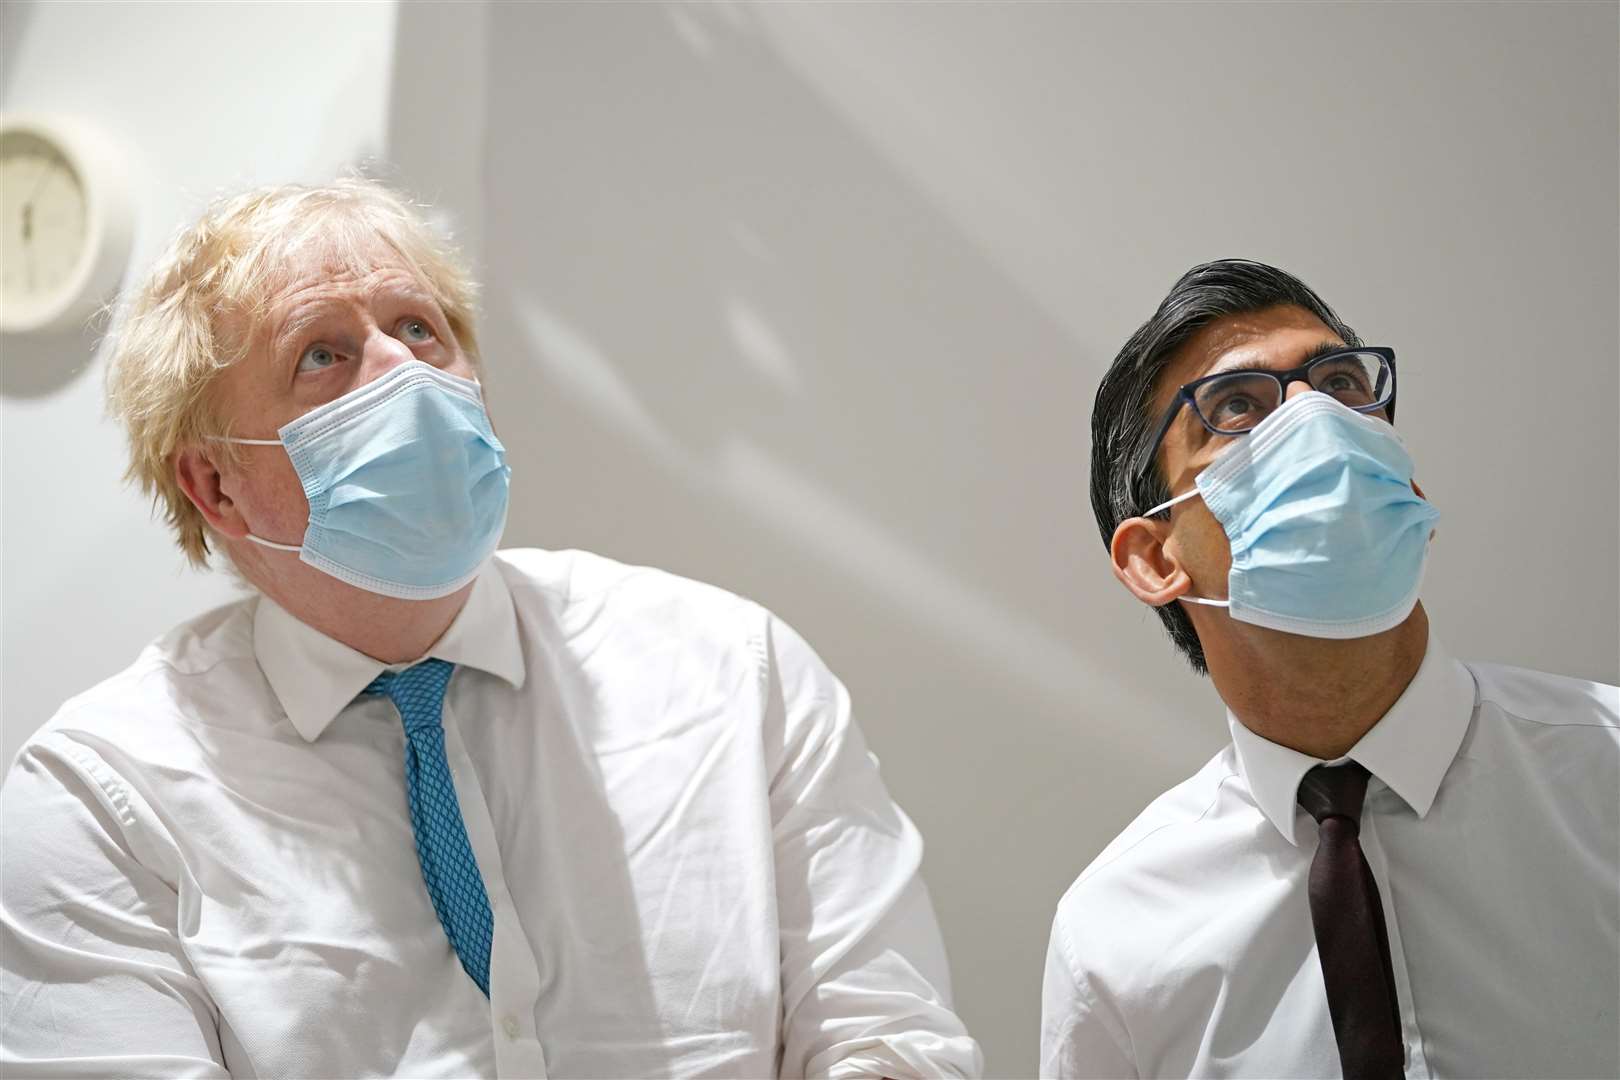 Boris Johnson, then prime minister, and Rishi Sunak, then chancellor, during a visit to the Kent Oncology Centre at Maidstone Hospital in February 2022 (Gareth Fuller/PA)